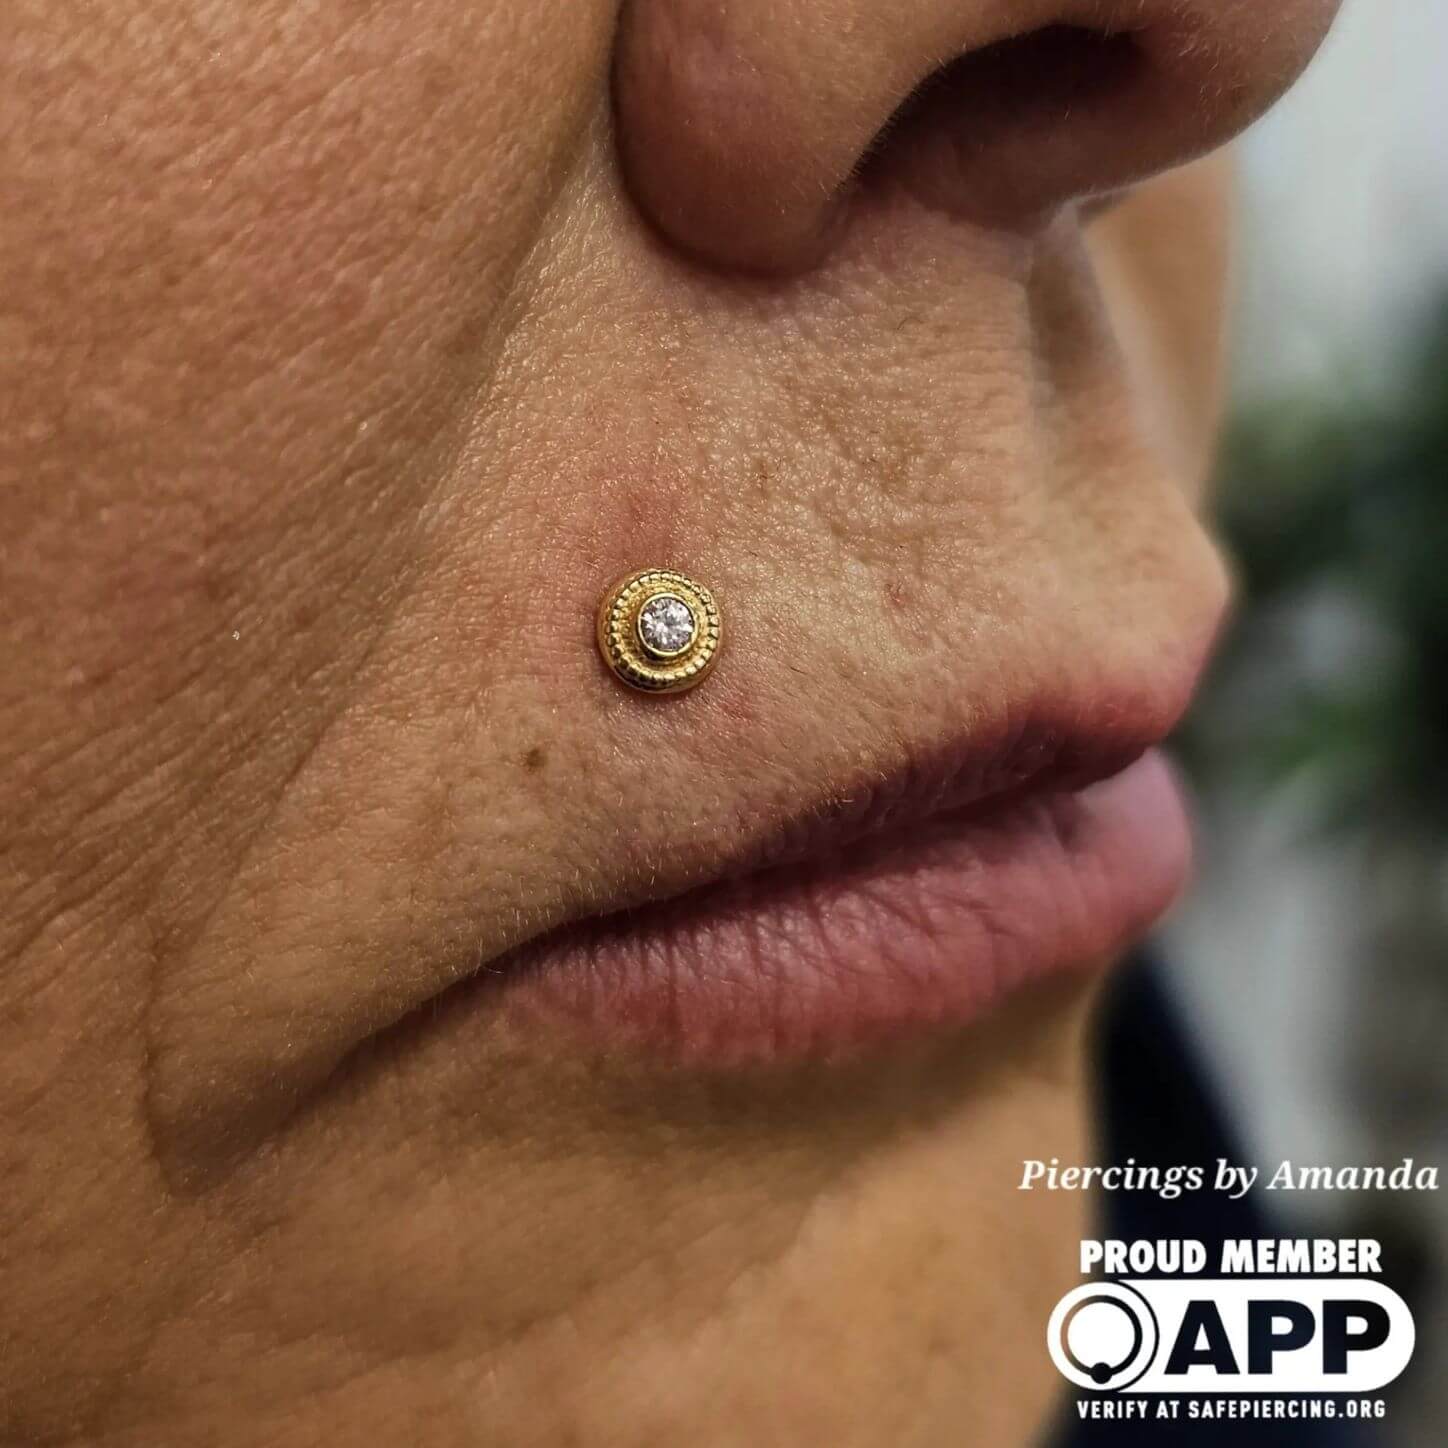 Healed Monroe piercing with 18k yellow gold